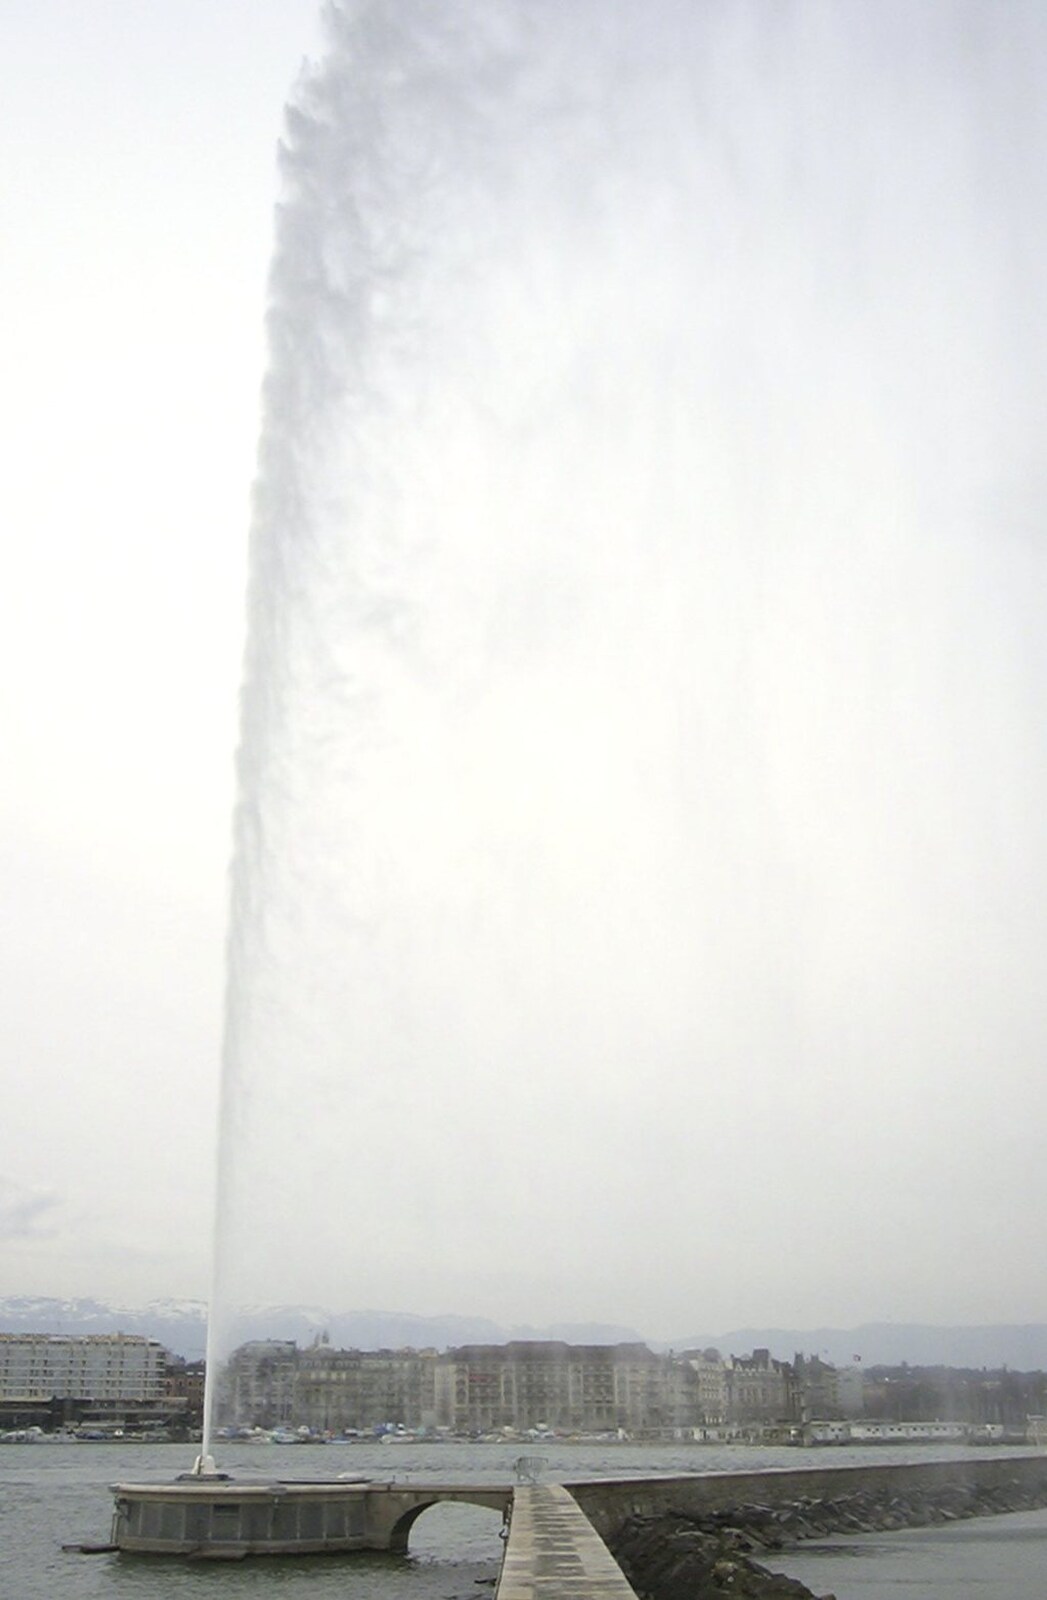 A close-up of the fountain from Nosher in Geneva, Switzerland - 17th March 2002